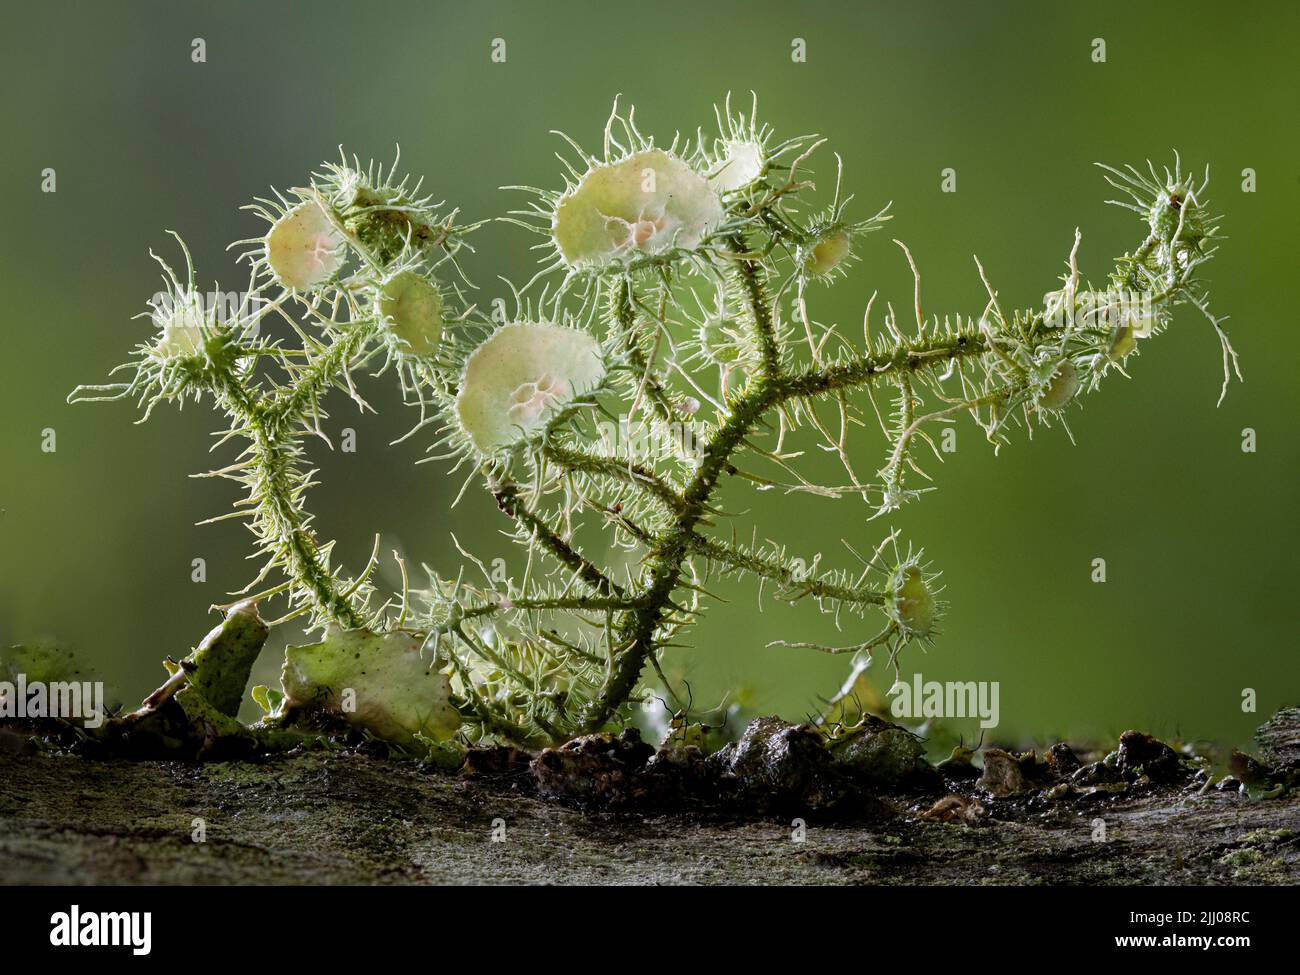 Beard lichen (Usnea sp.) with disclike fruiting bodies (apothecia), growing on bark of tree in central Virginia. Stock Photo